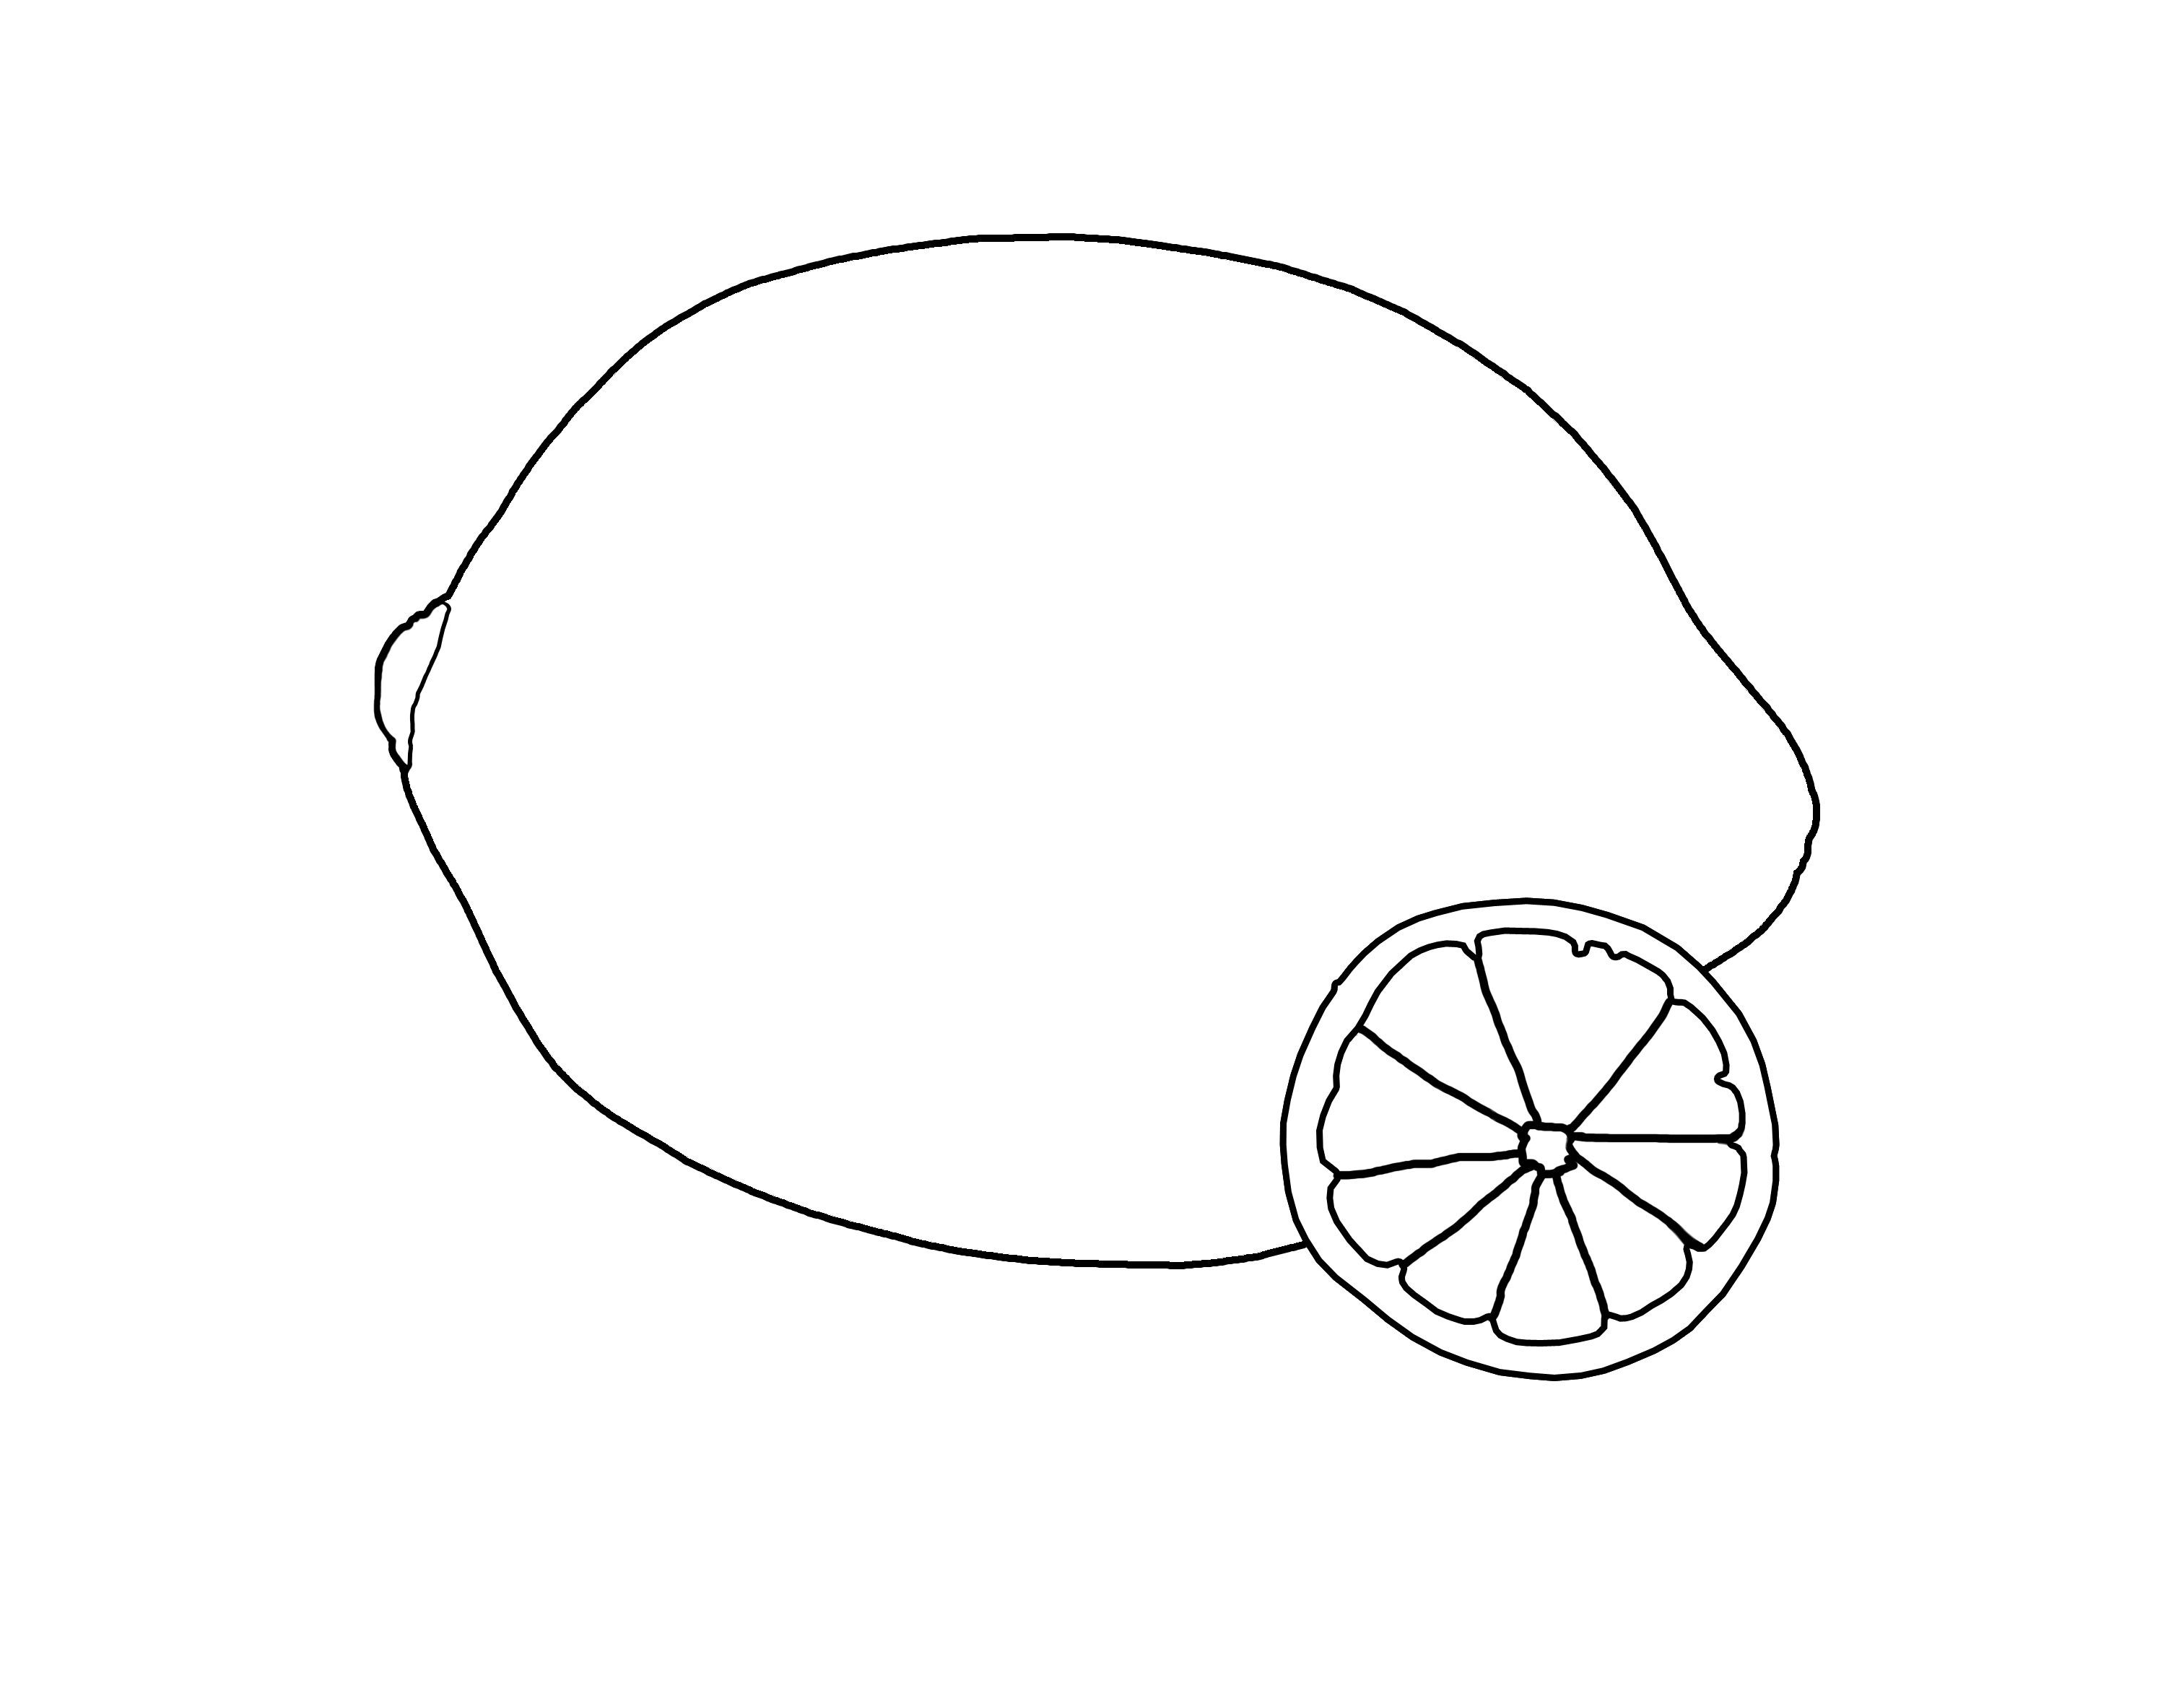 Lemon coloring pages download and print for free